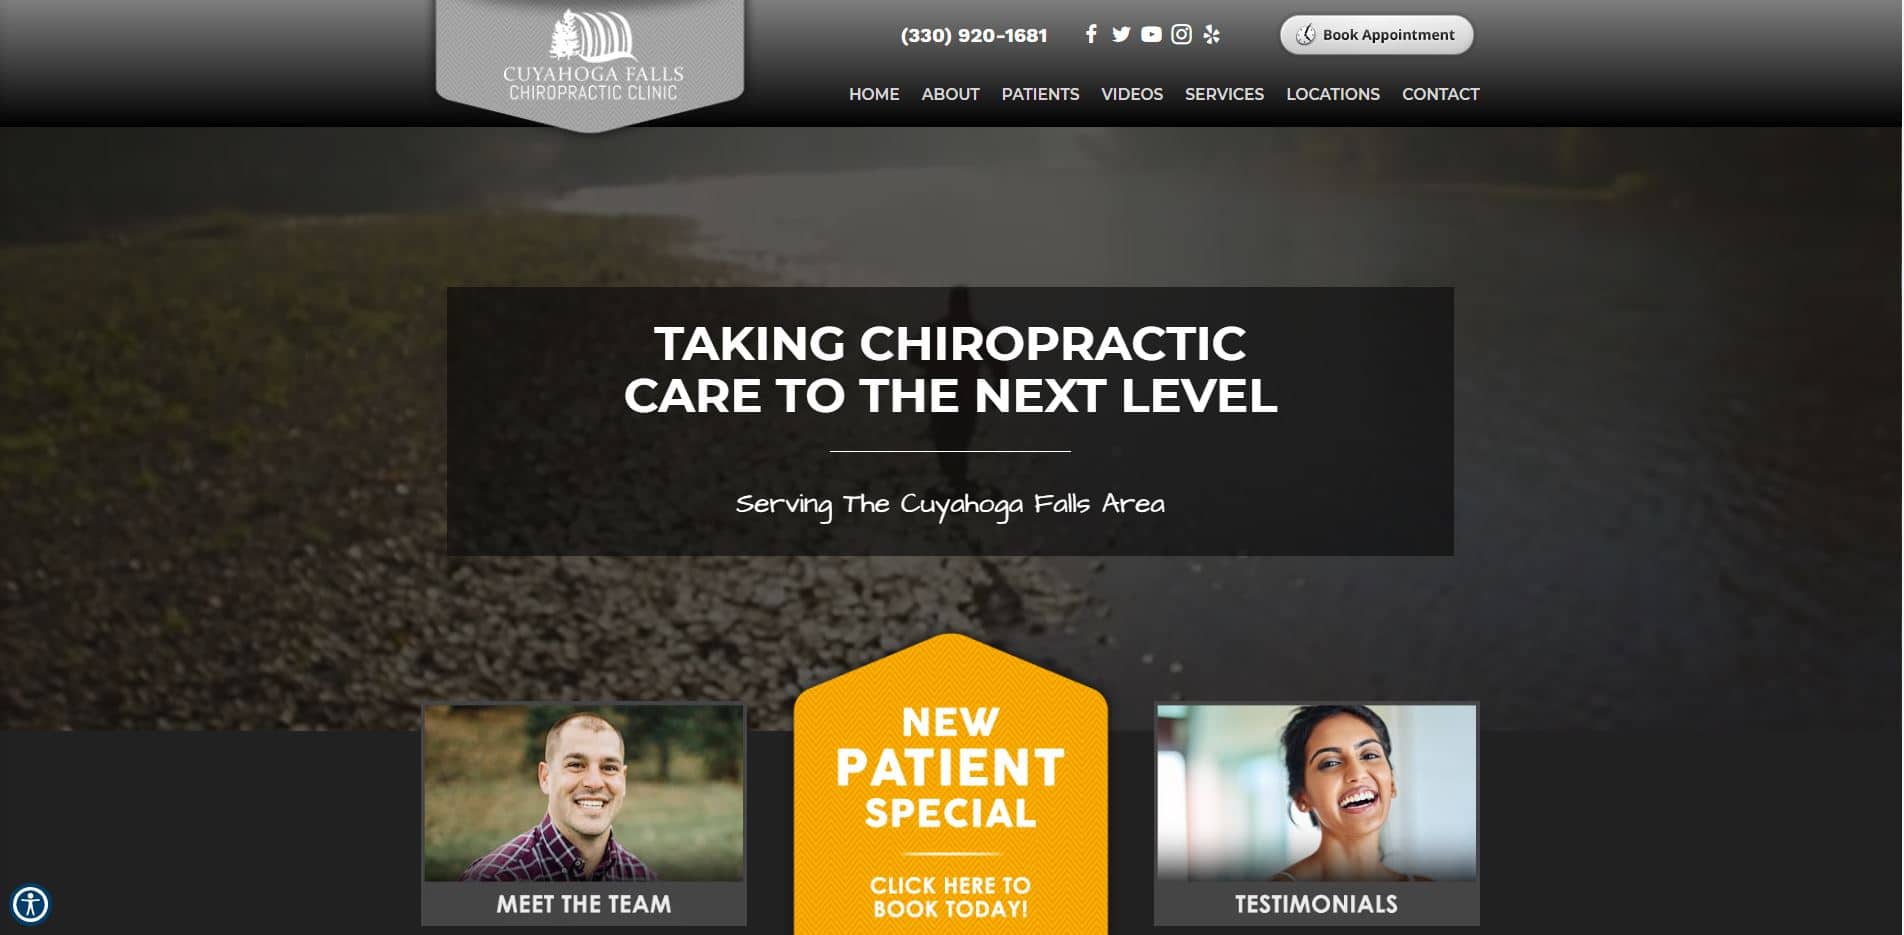 Chiropractor in Cuyahoga